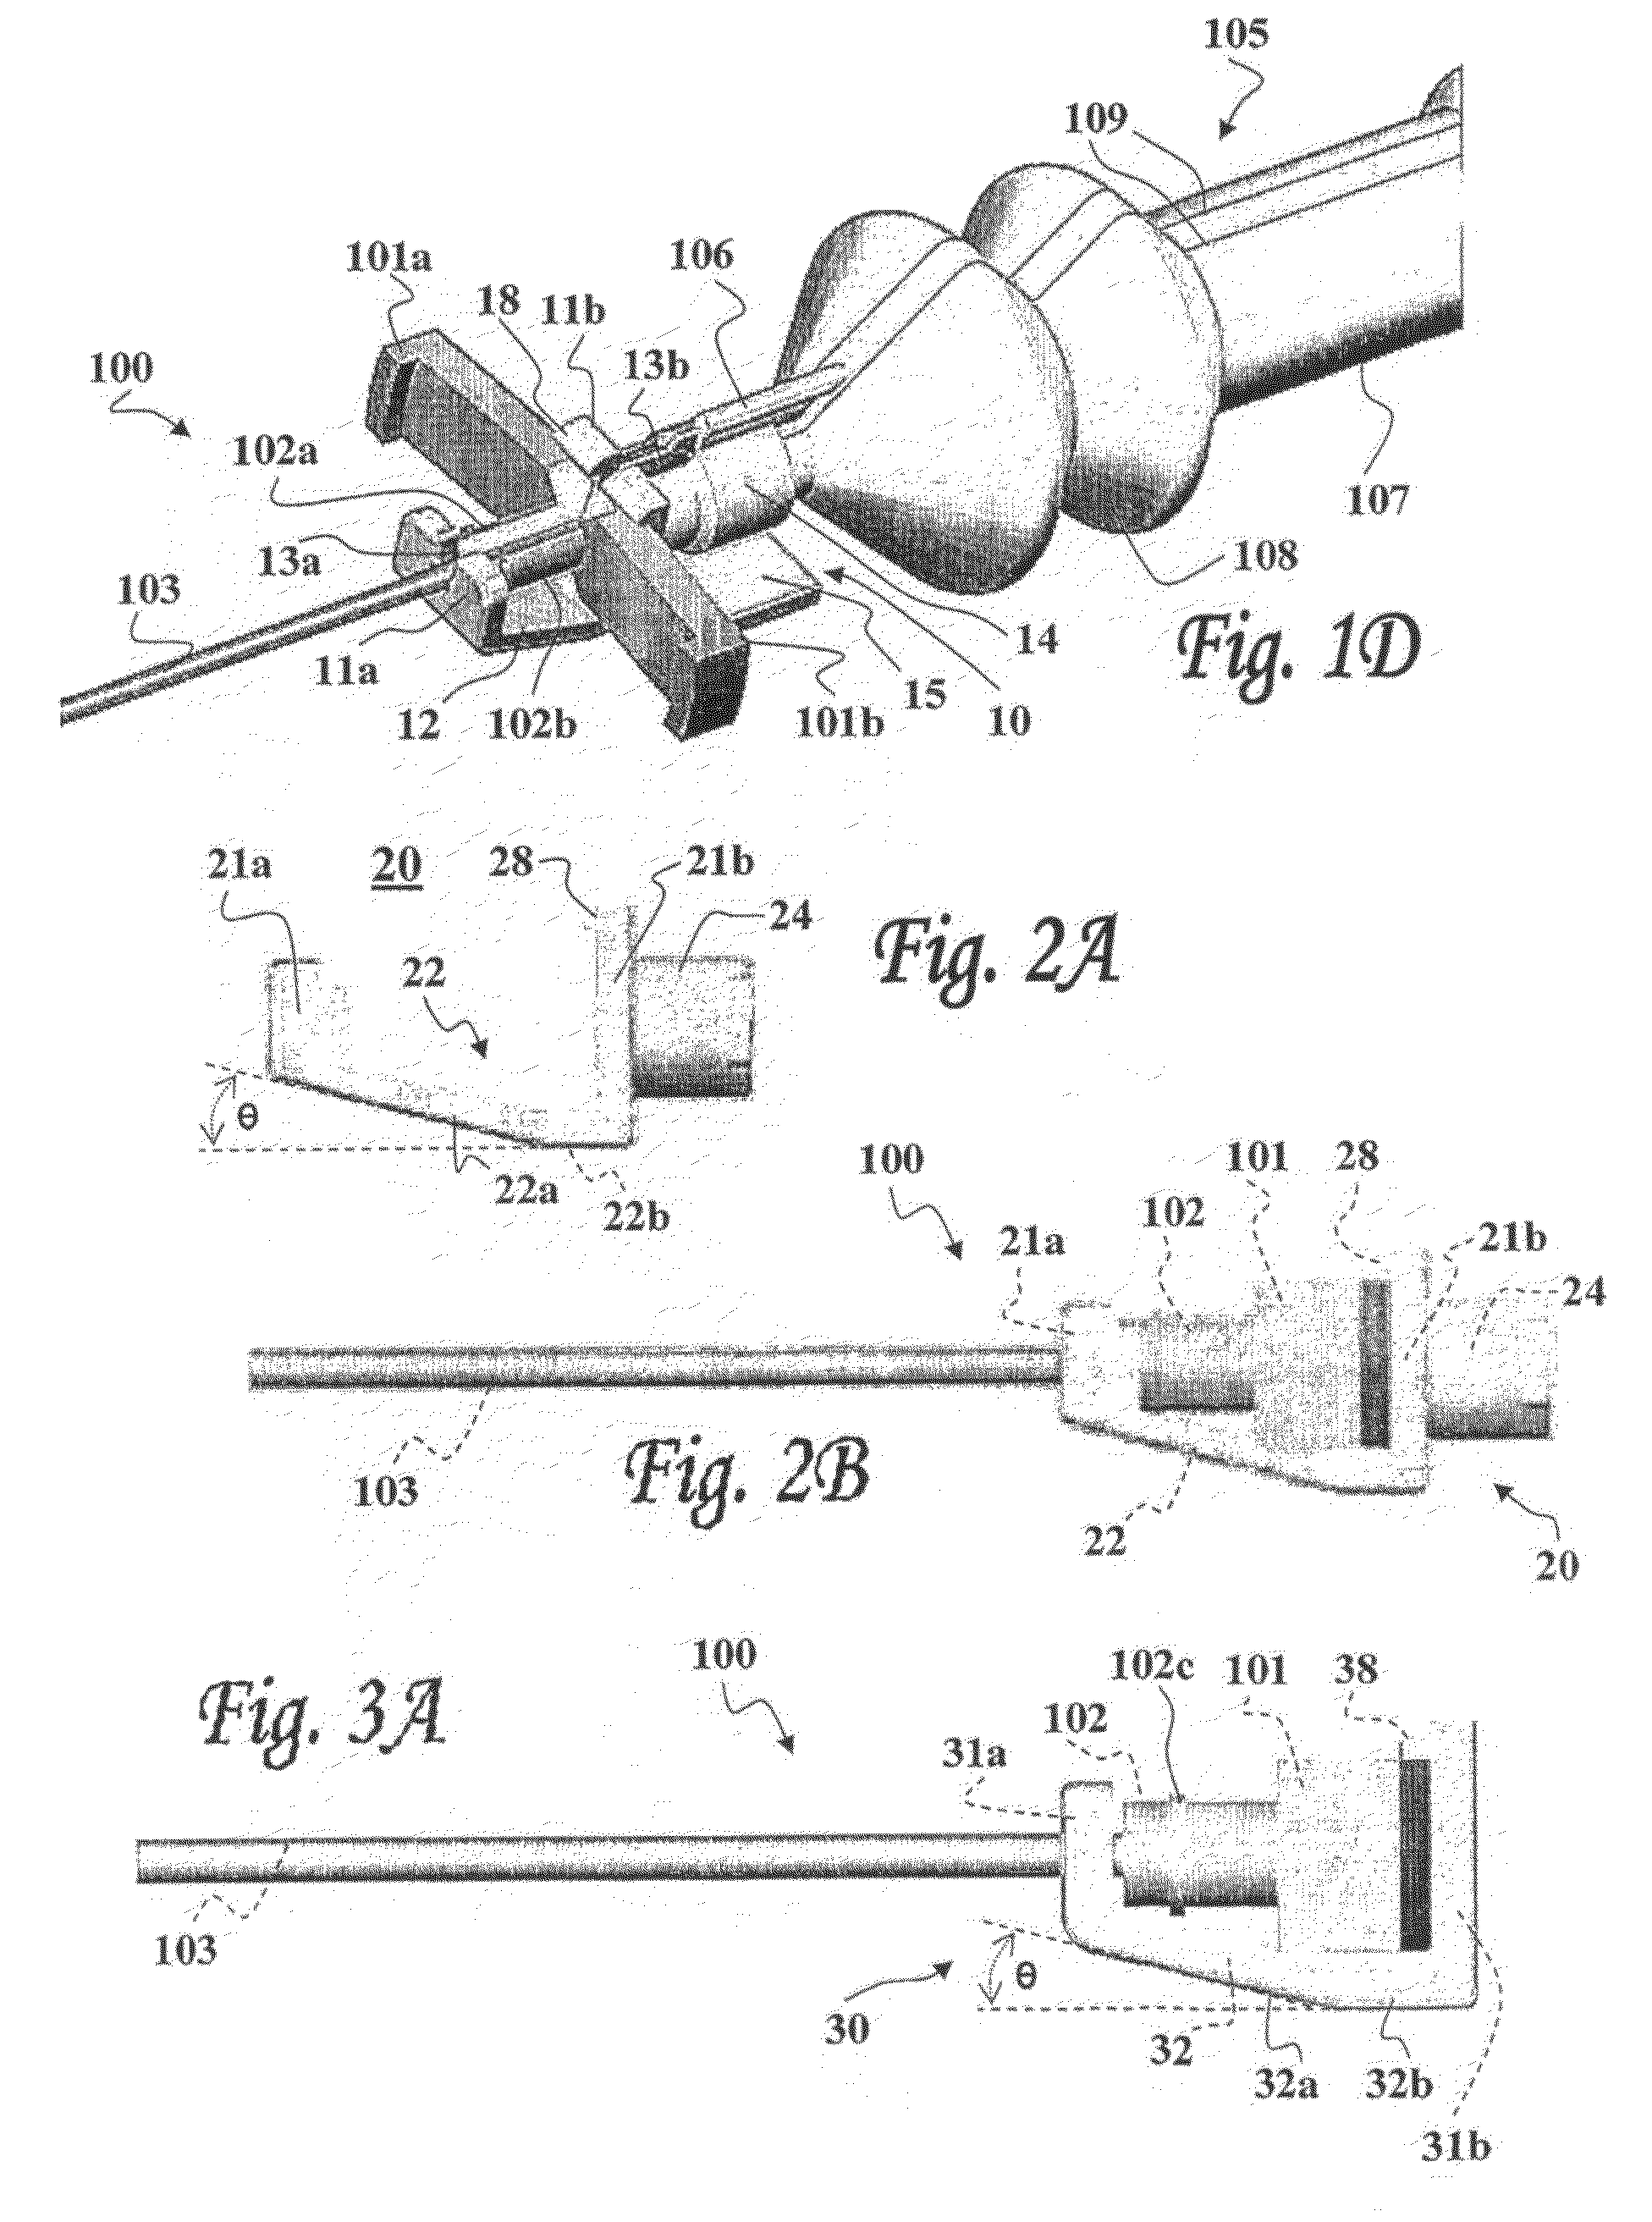 Removable adapter for a splittable introducer and method of use thereof